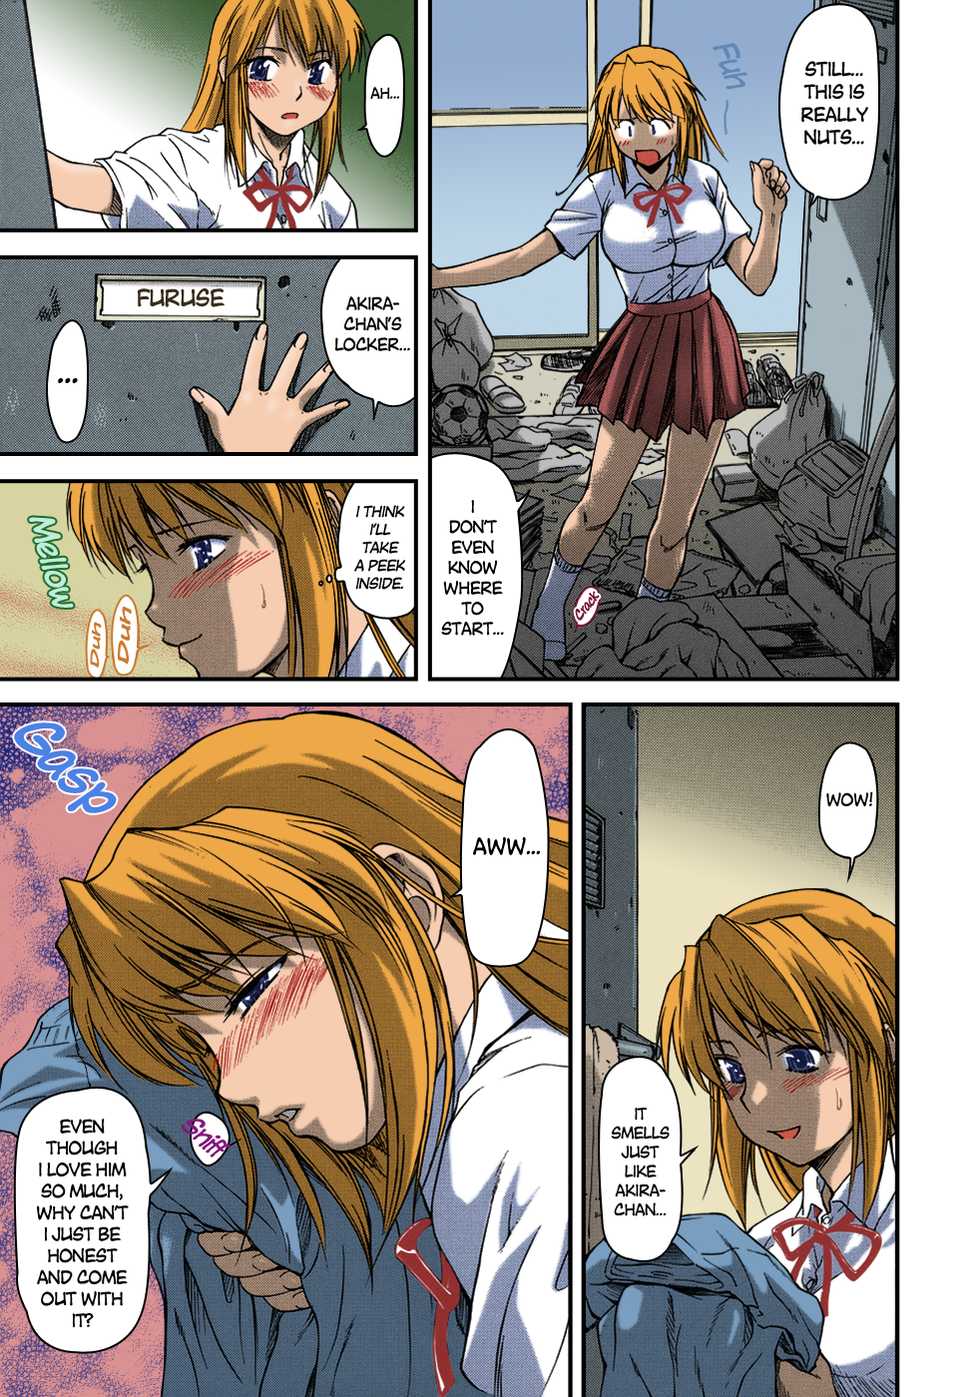 [Nagare Ippon] Offside Girl Ch. 1-4 [English] [Colorized] [Decensored] [WIP] - Page 13